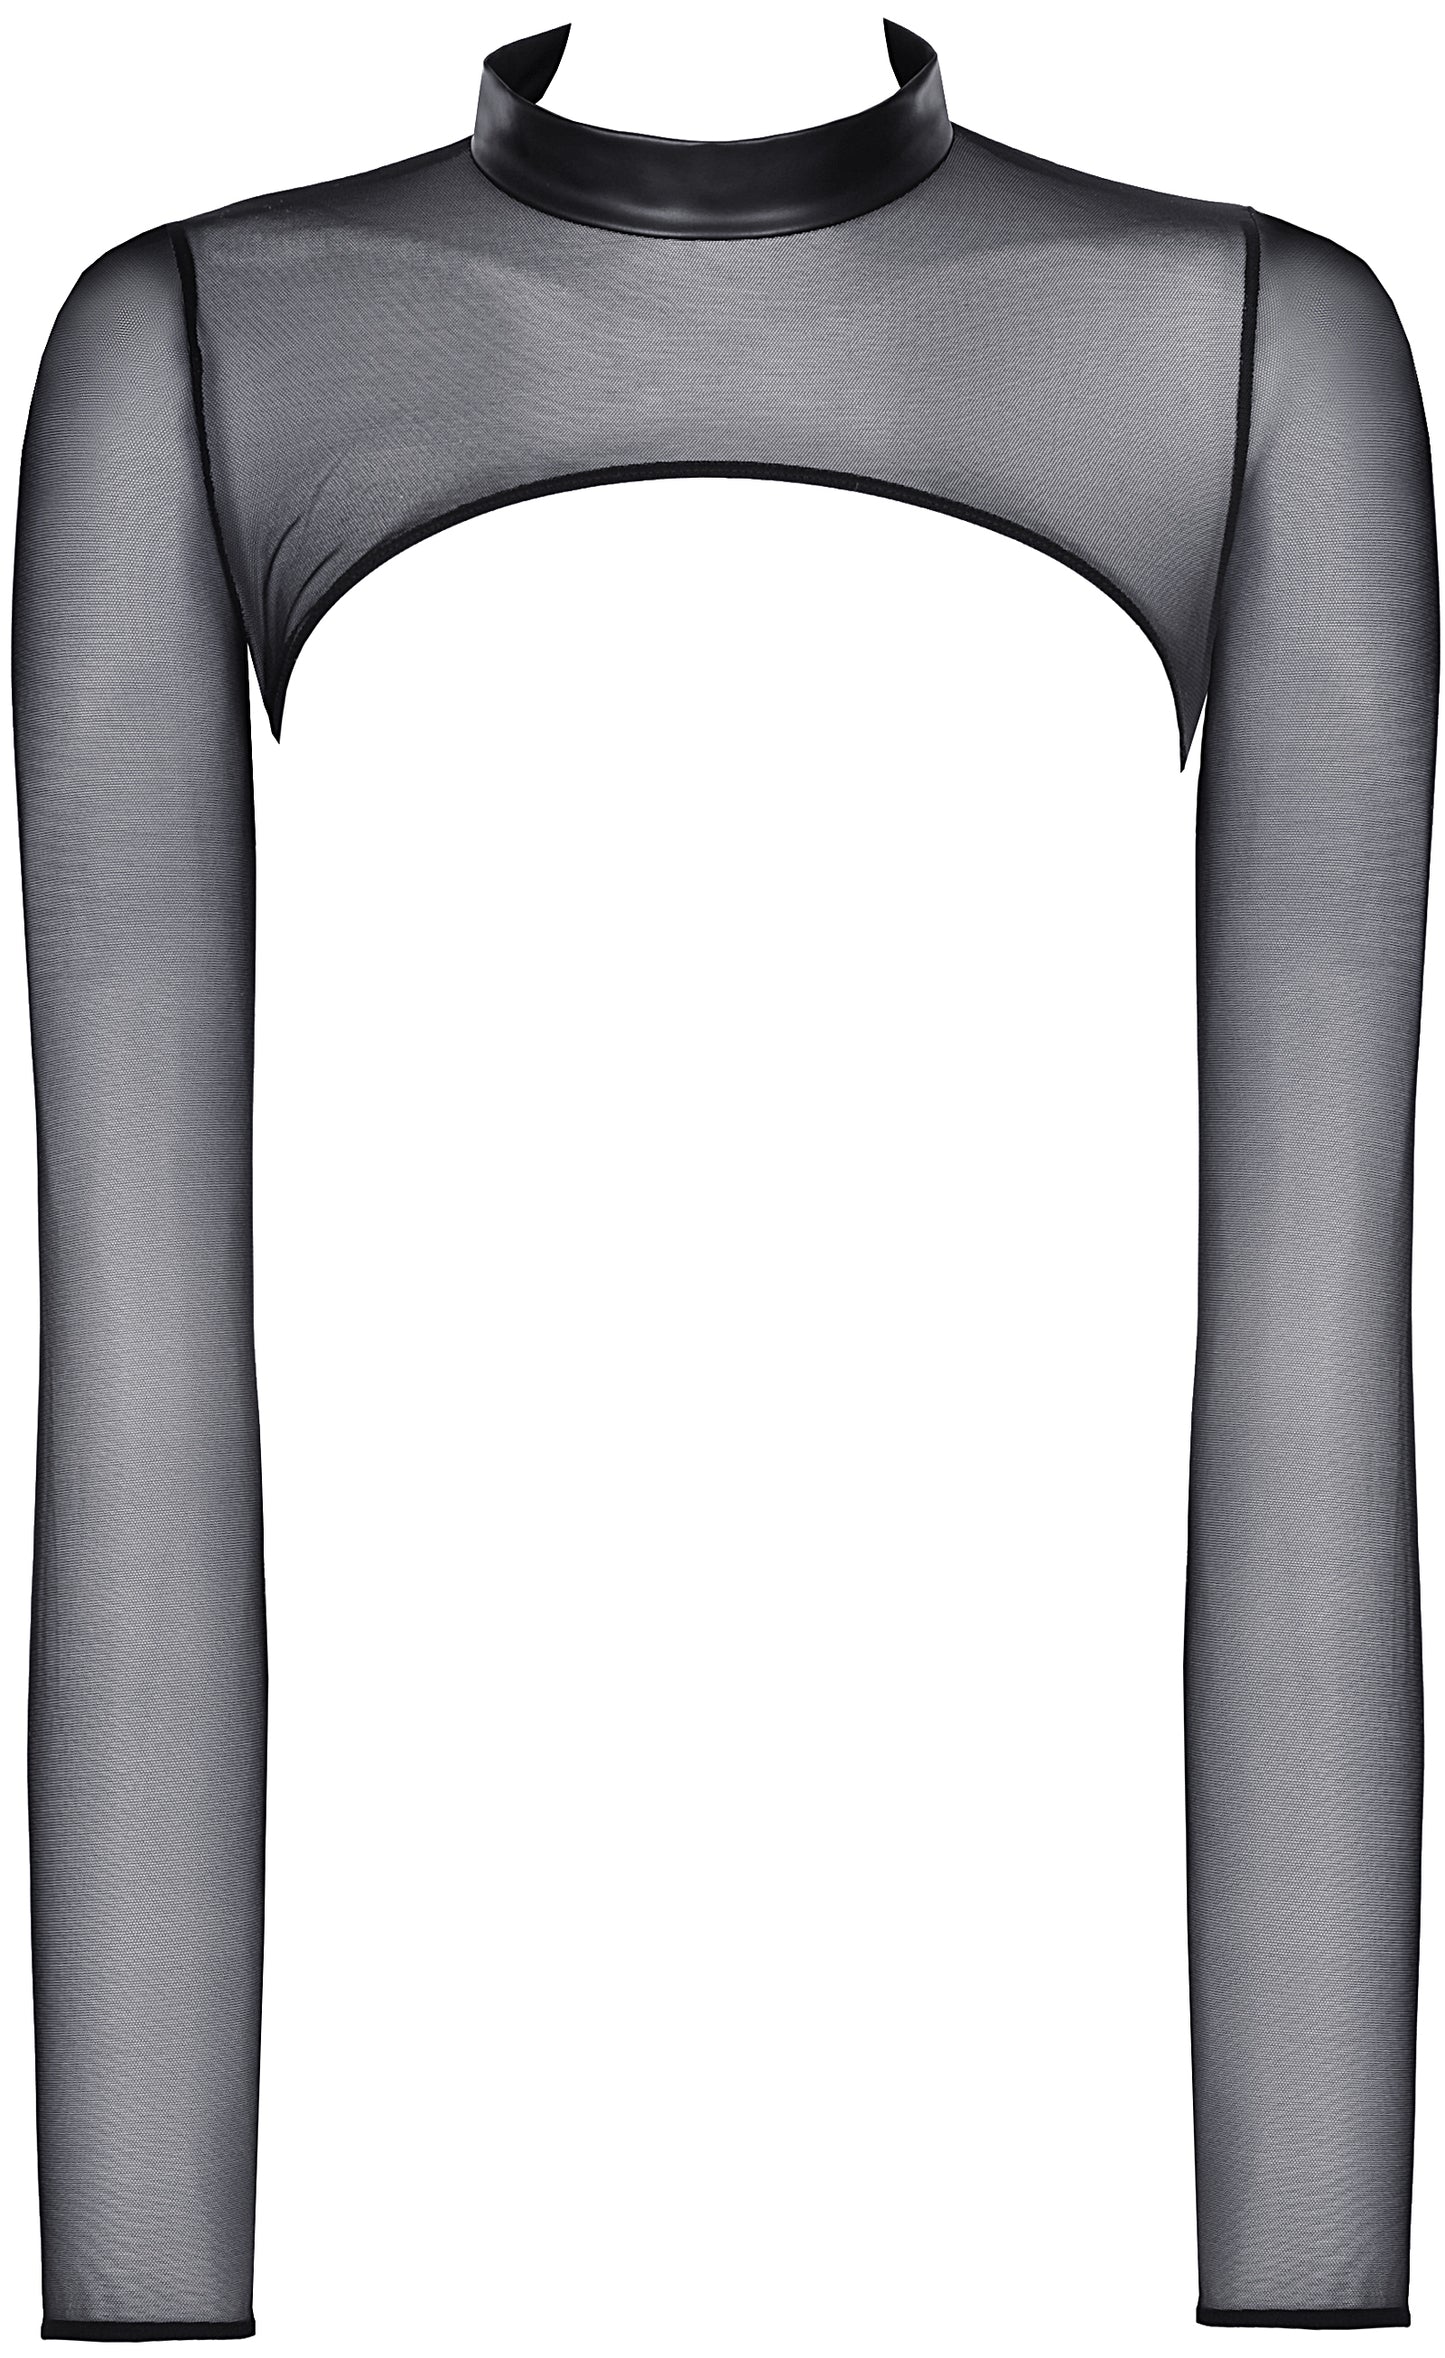 The front of the Mesh Shrug with Wetlook Collar.